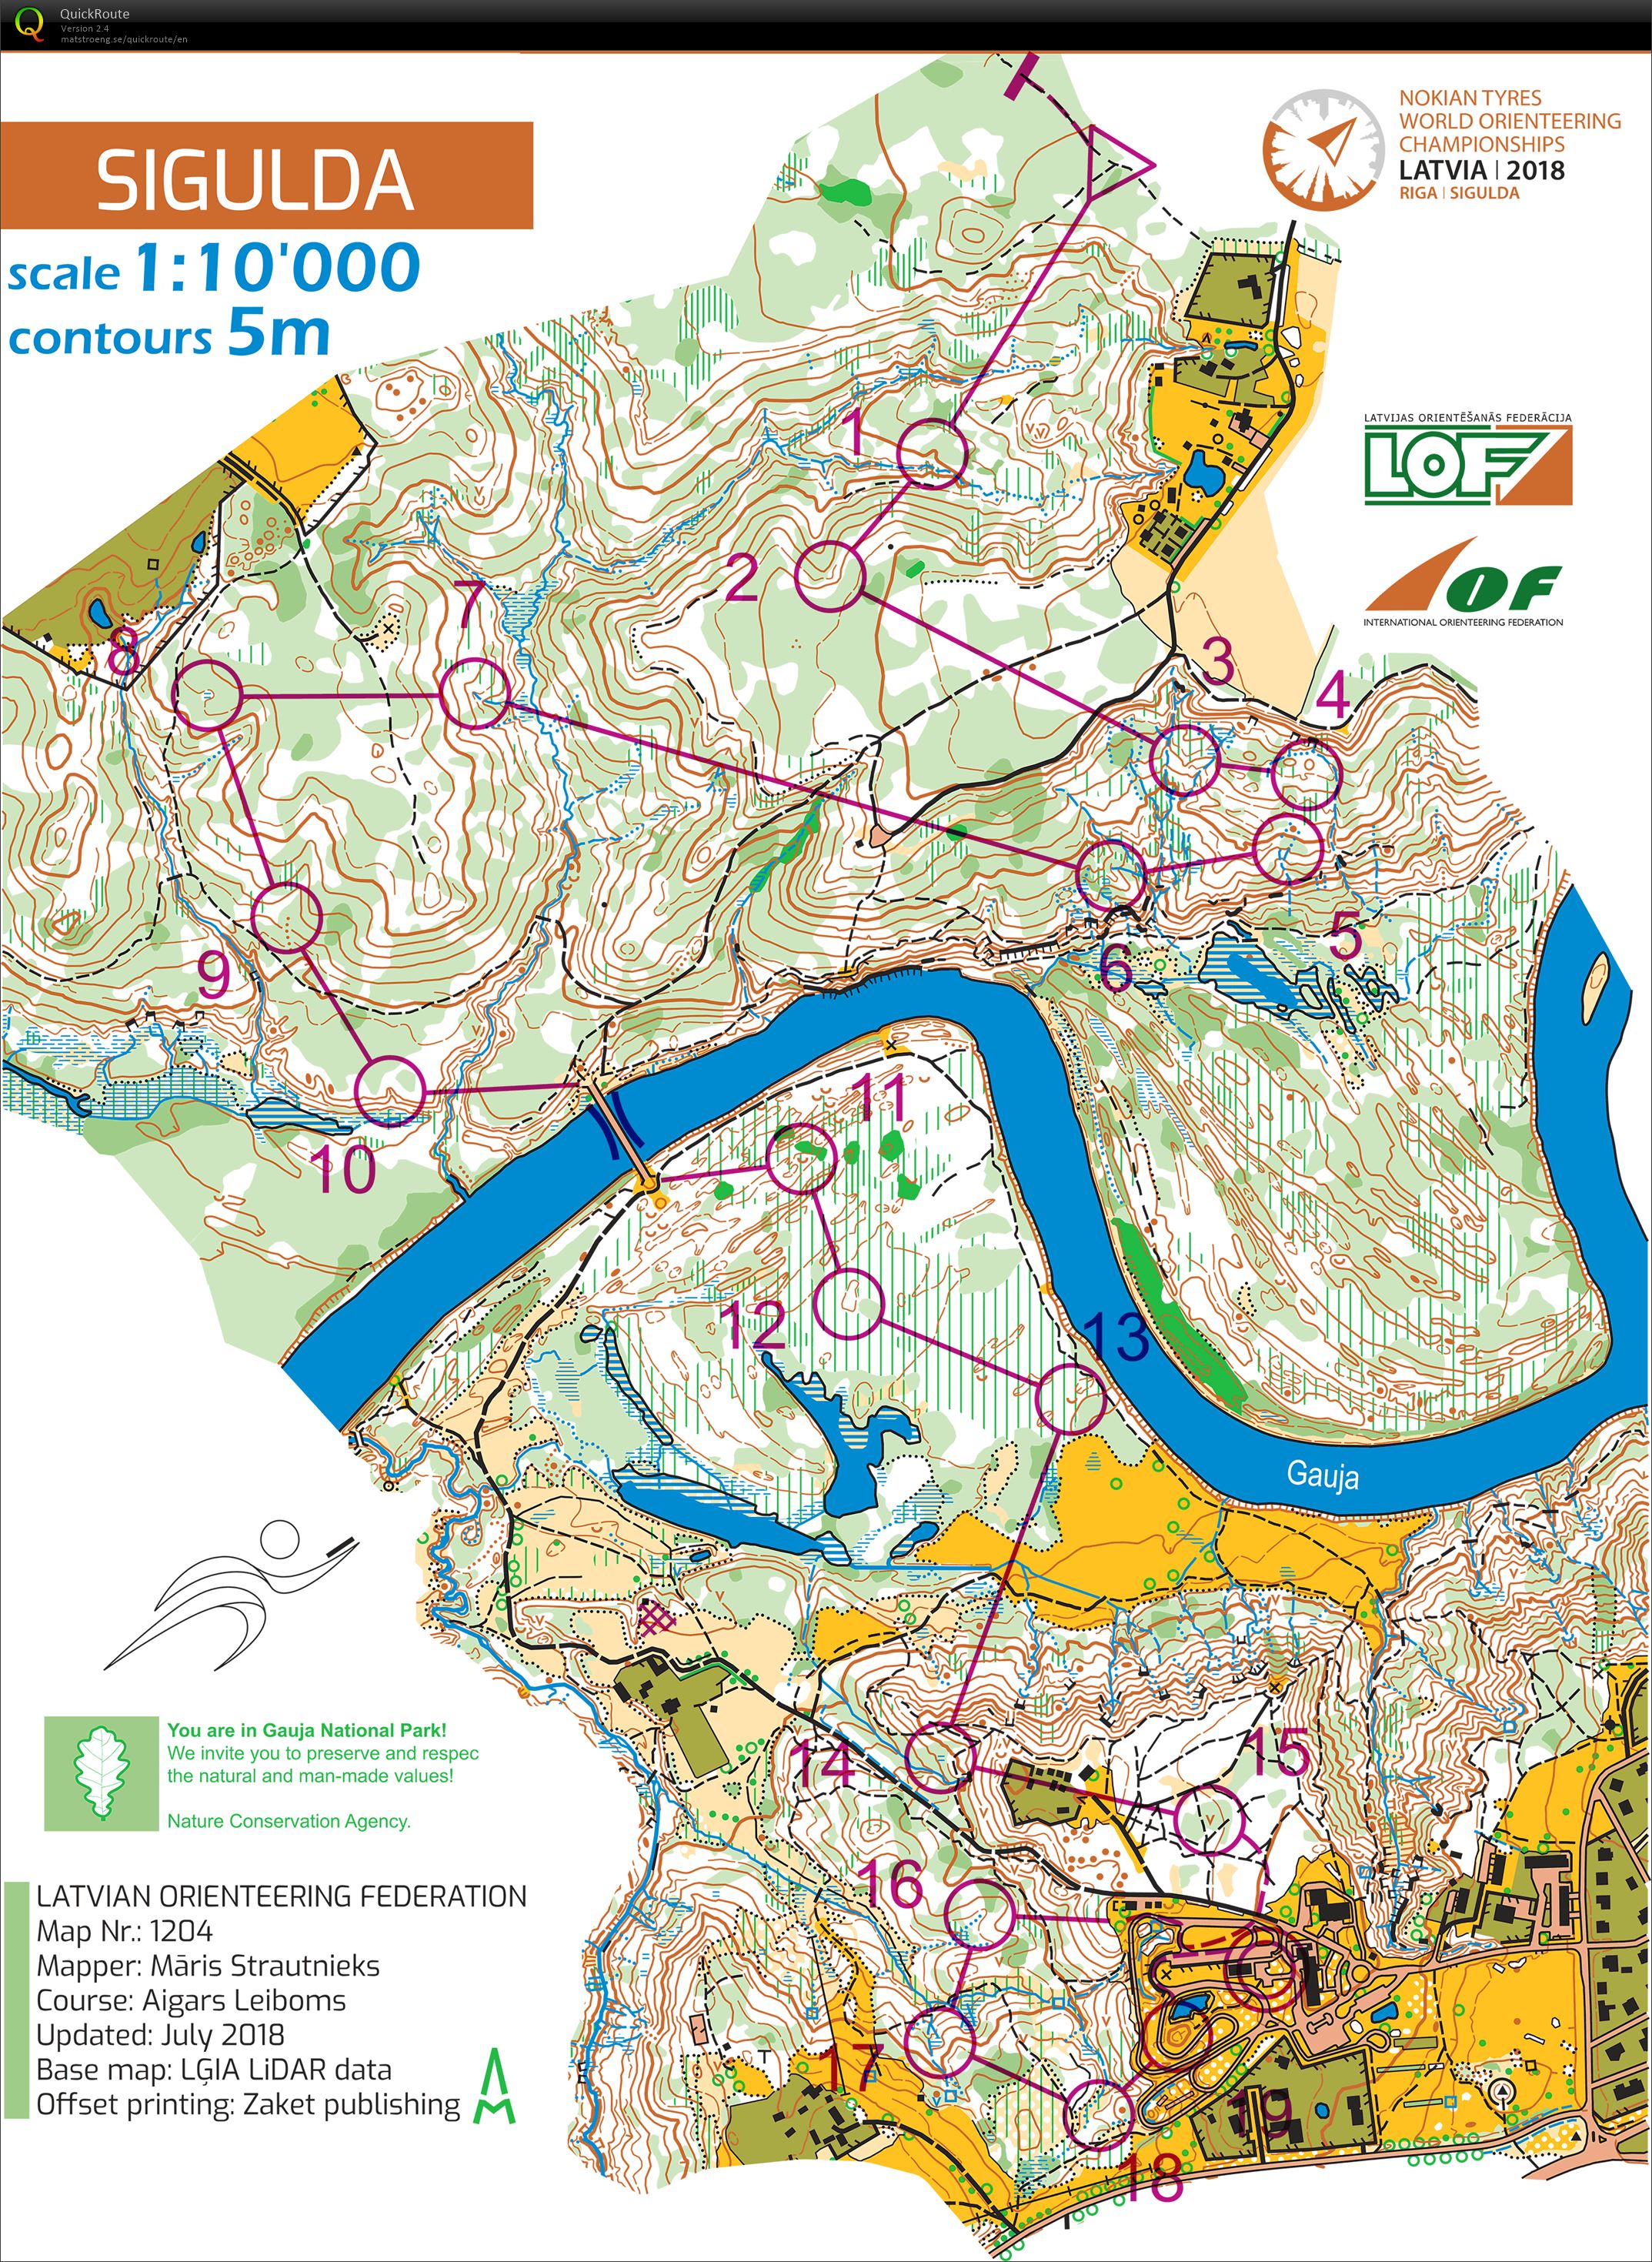 WOC 2018 Middle (07/08/2018)